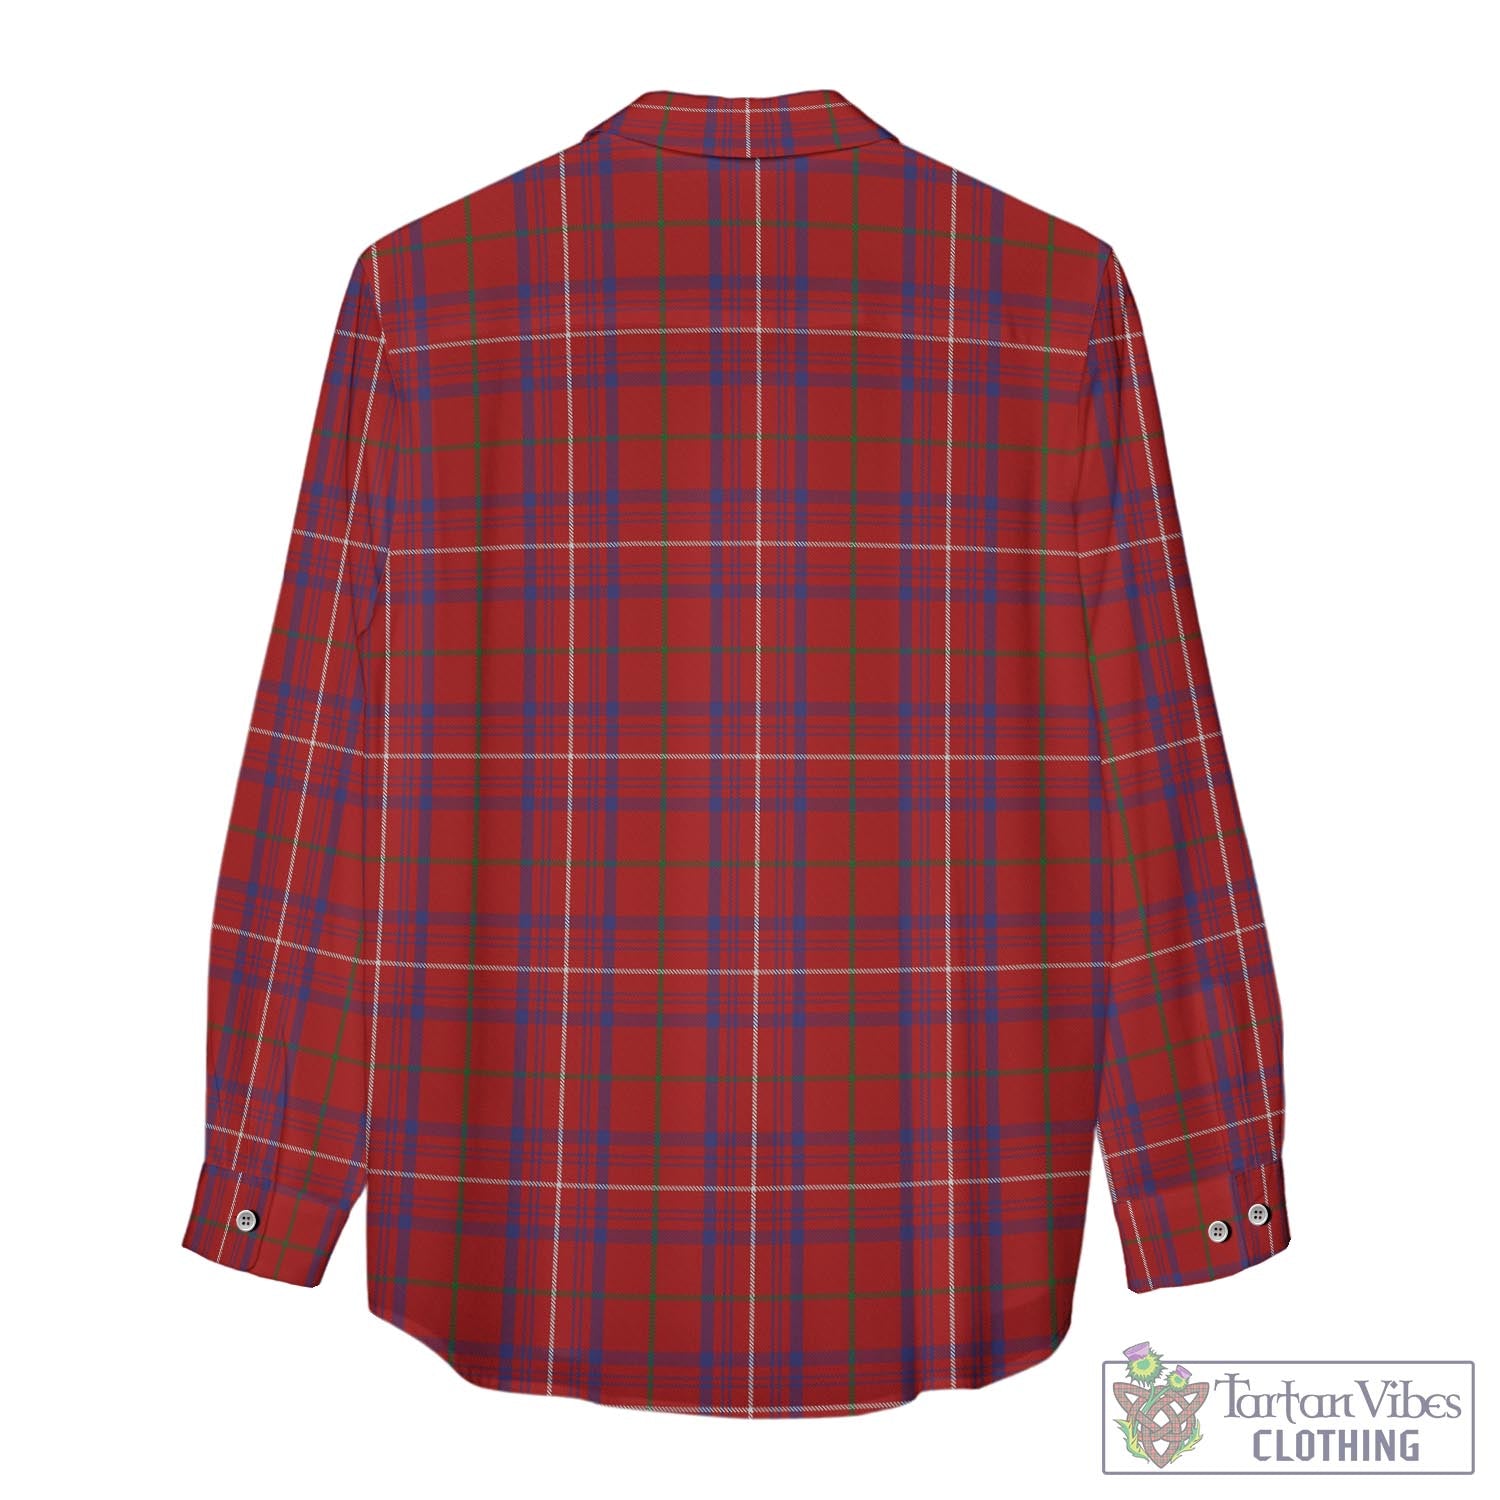 Tartan Vibes Clothing Rose Tartan Womens Casual Shirt with Family Crest